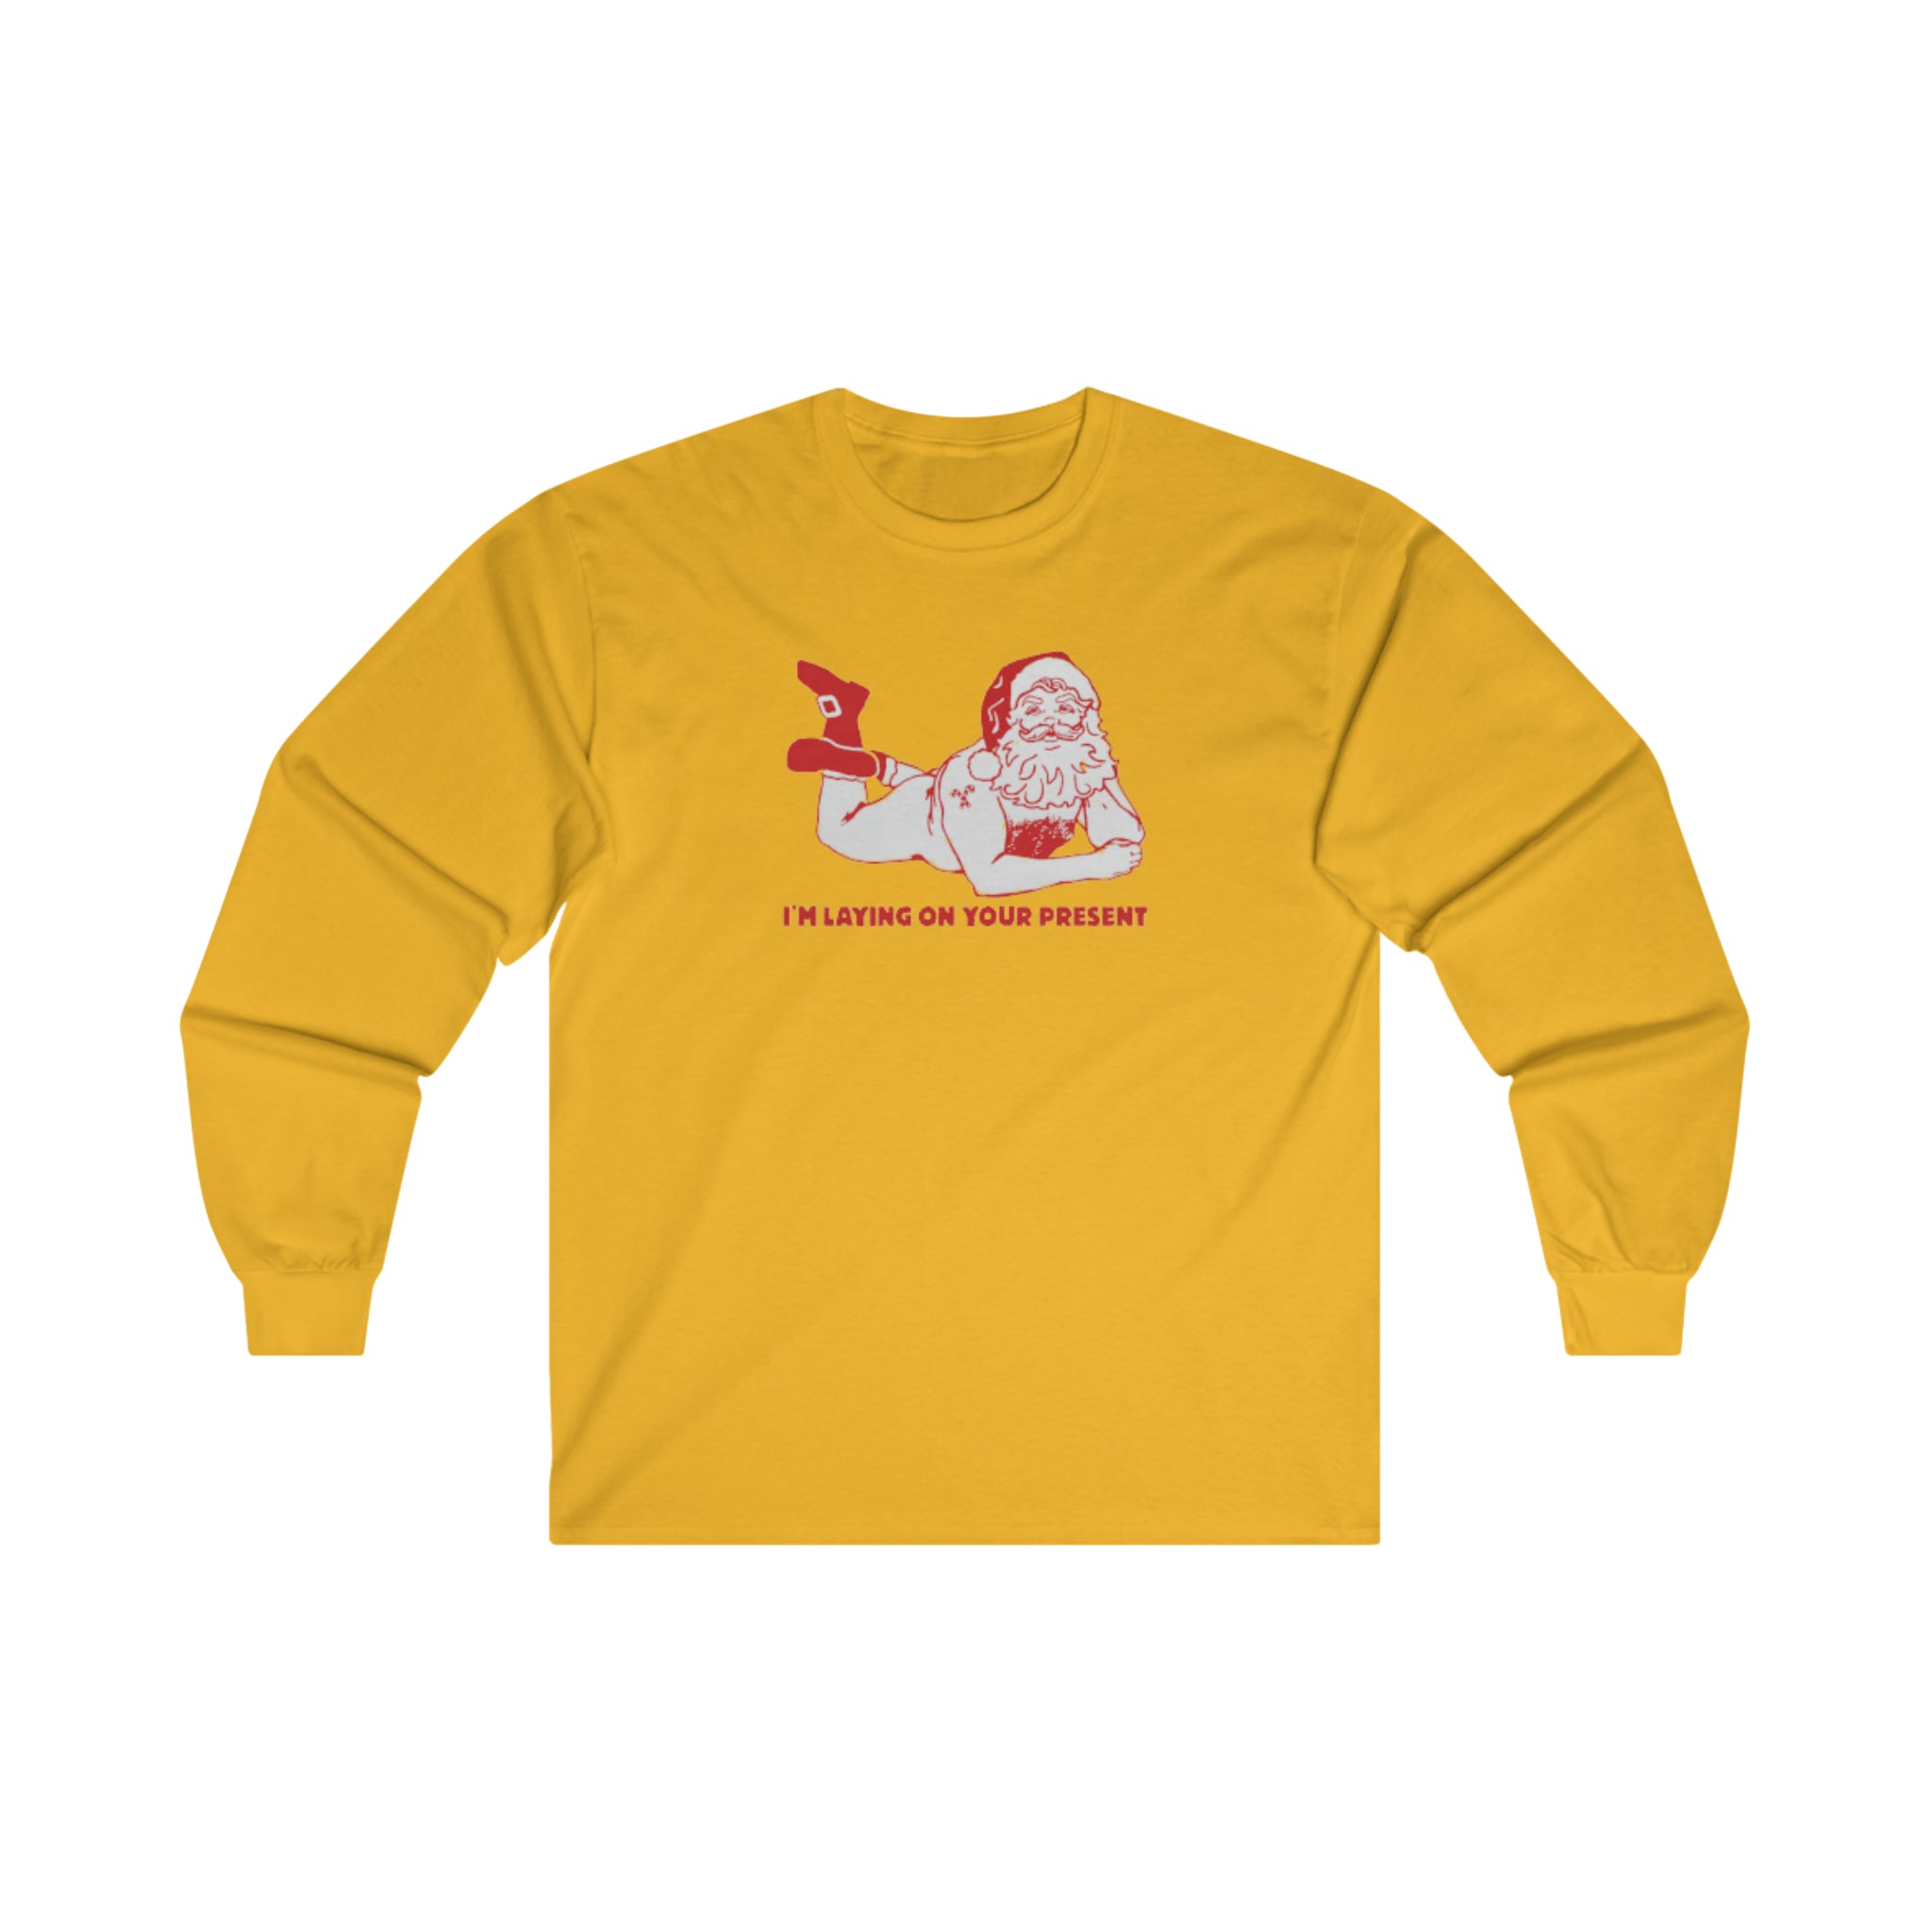 I'm Laying On Your Present Long-Sleeve T-Shirt